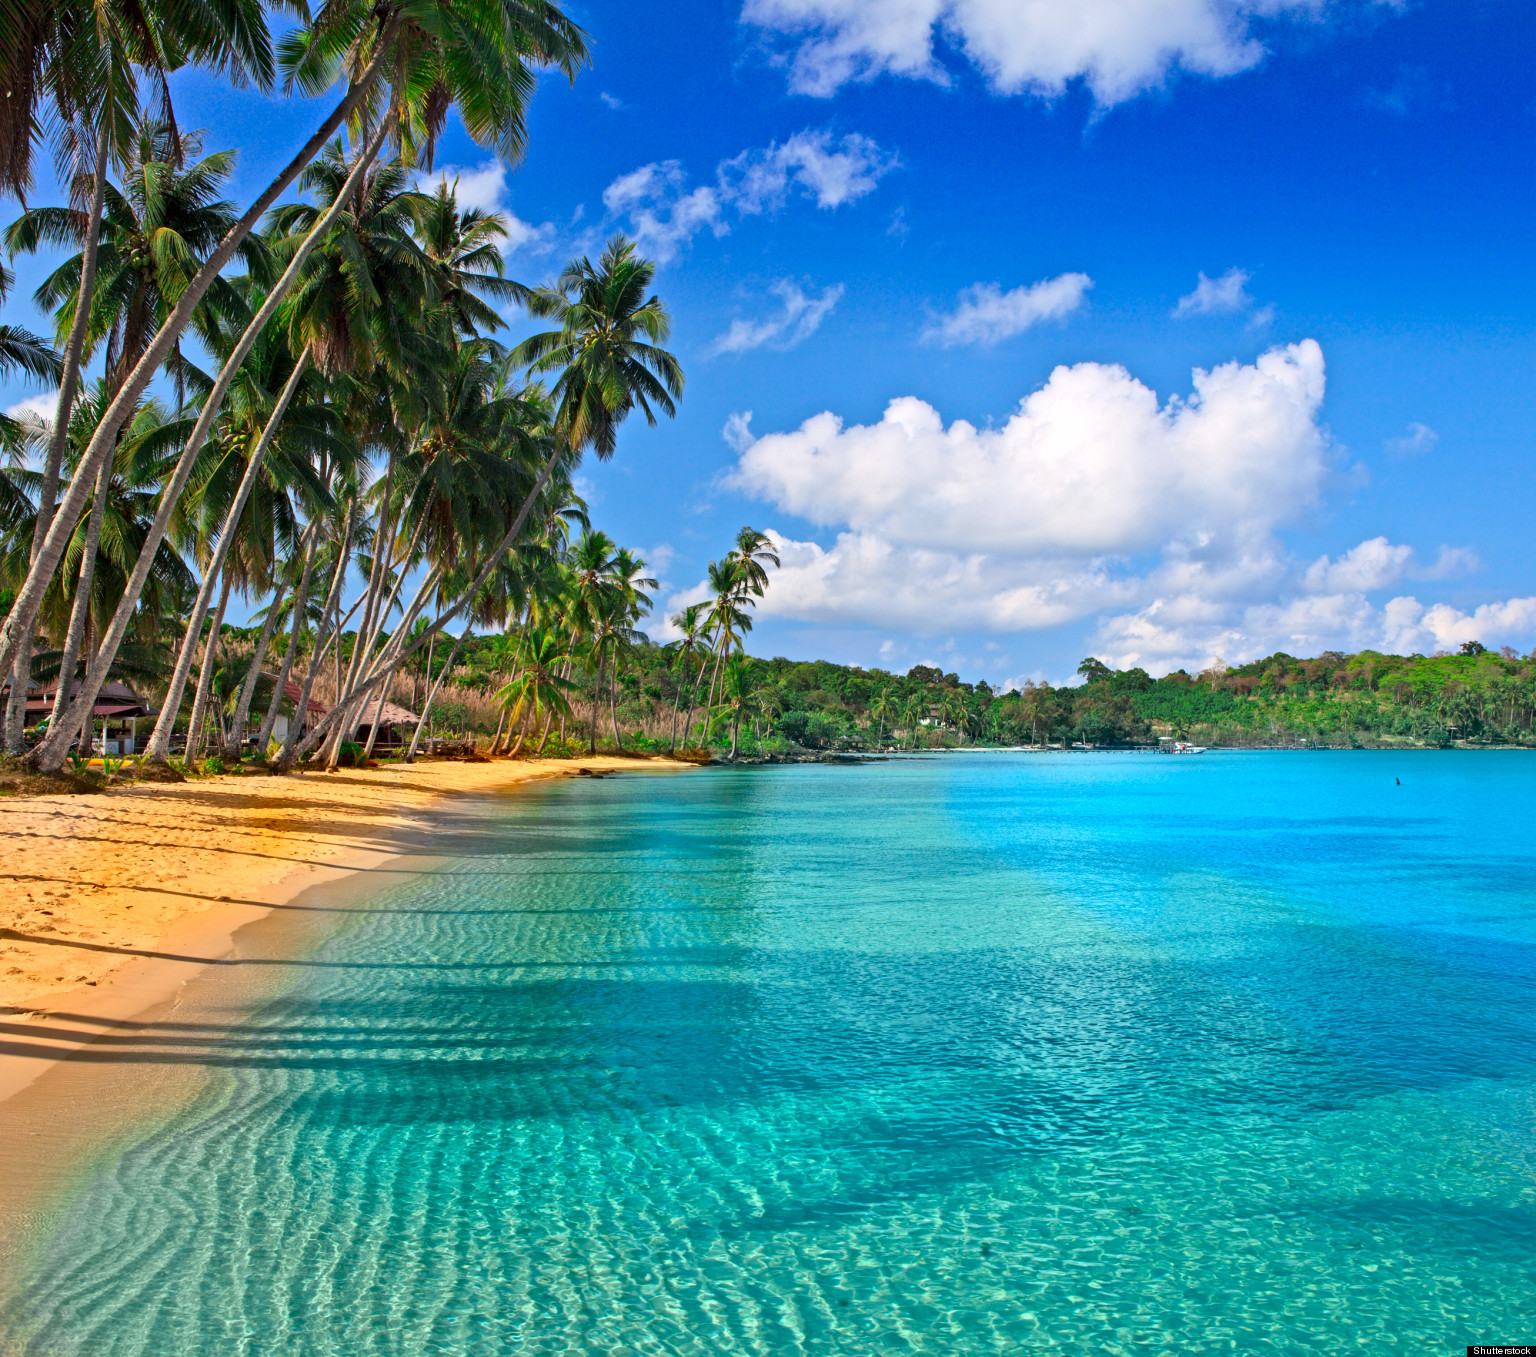 The 11 Sexiest Beaches In The World (PHOTOS) | HuffPost